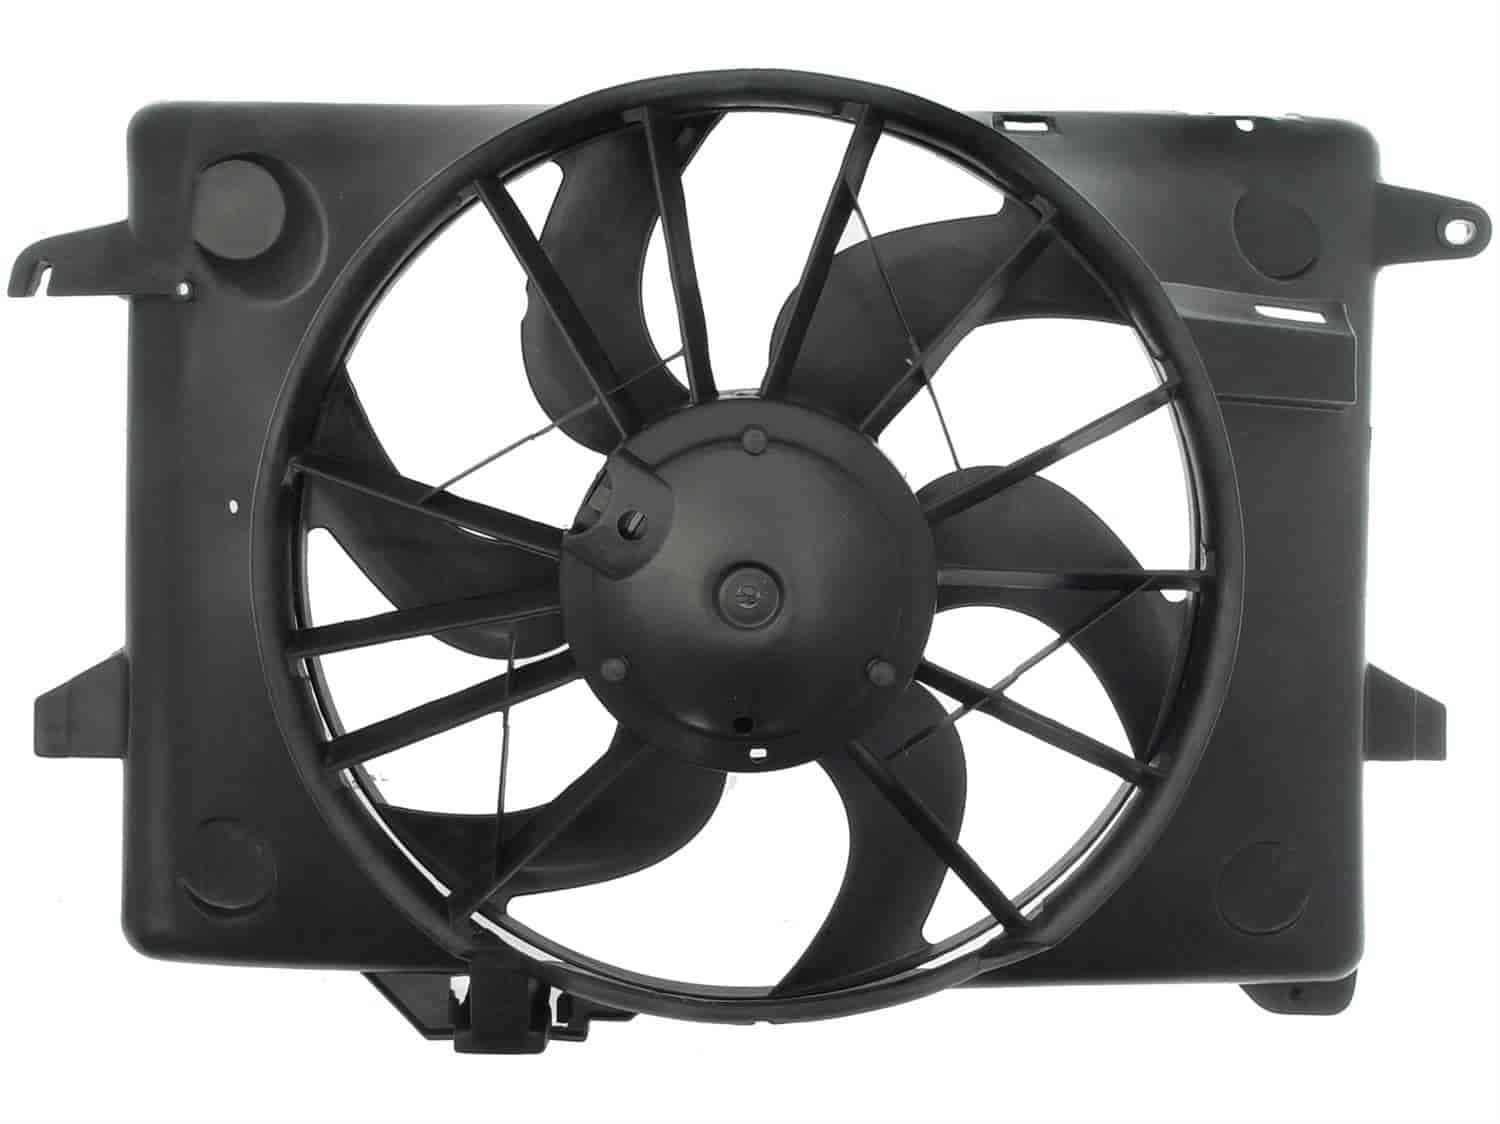 620-108 Radiator Fan Assembly for 1998-2000 Ford Crown Victoria, Lincoln Town Car, Mercury Grand Marquis